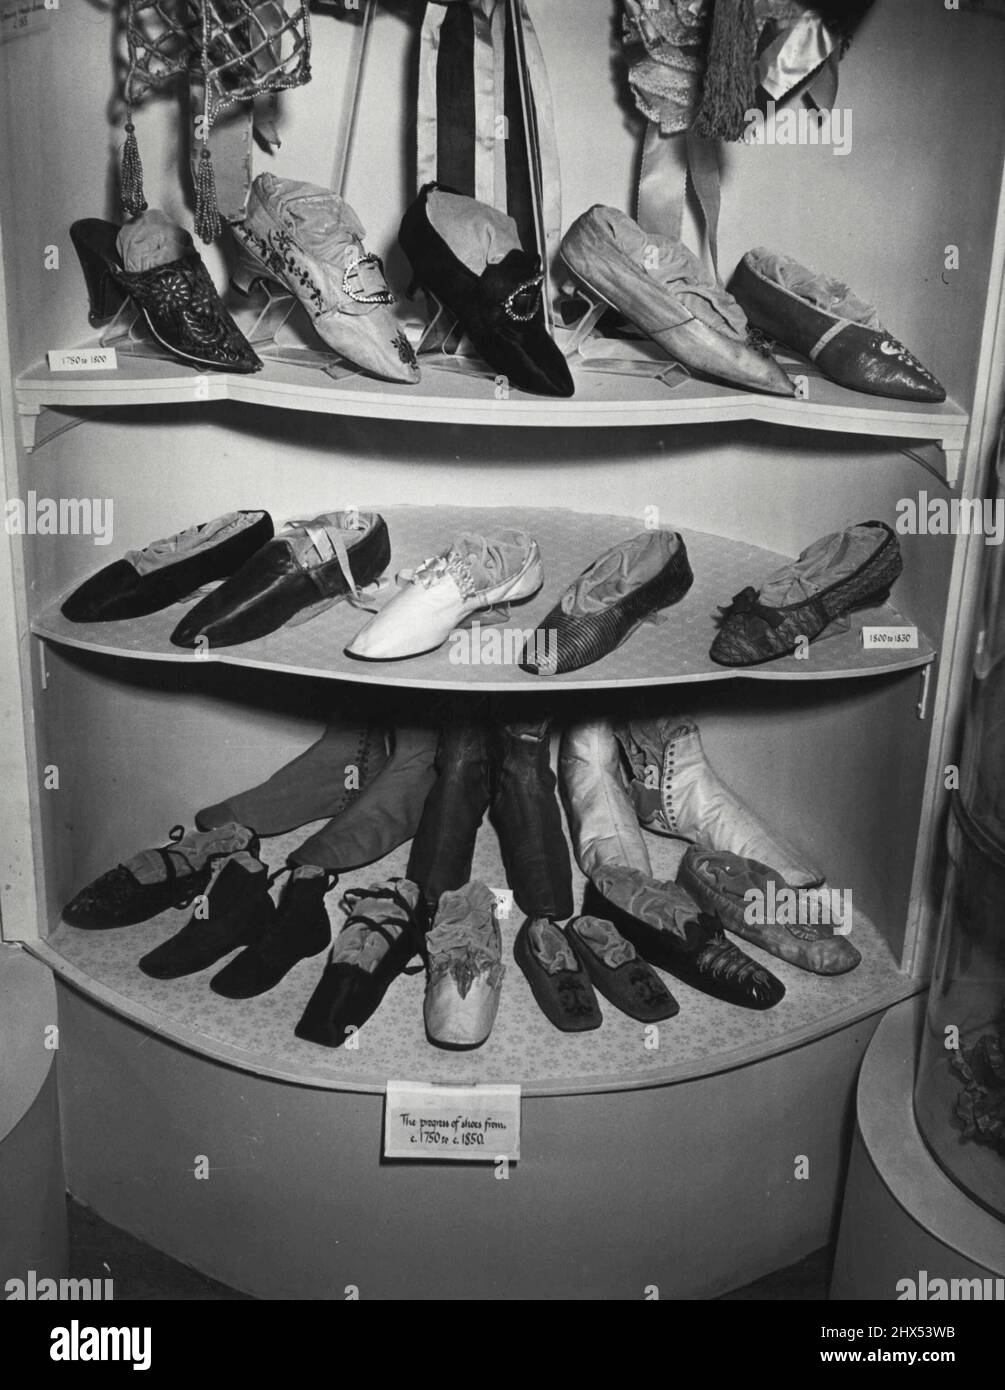 Case showing progress of chose 1750 to 1850. The Museum of Costume at Eridge Castle, Kent. June 01, 1955. (Photo by Fox Photos). Stock Photo